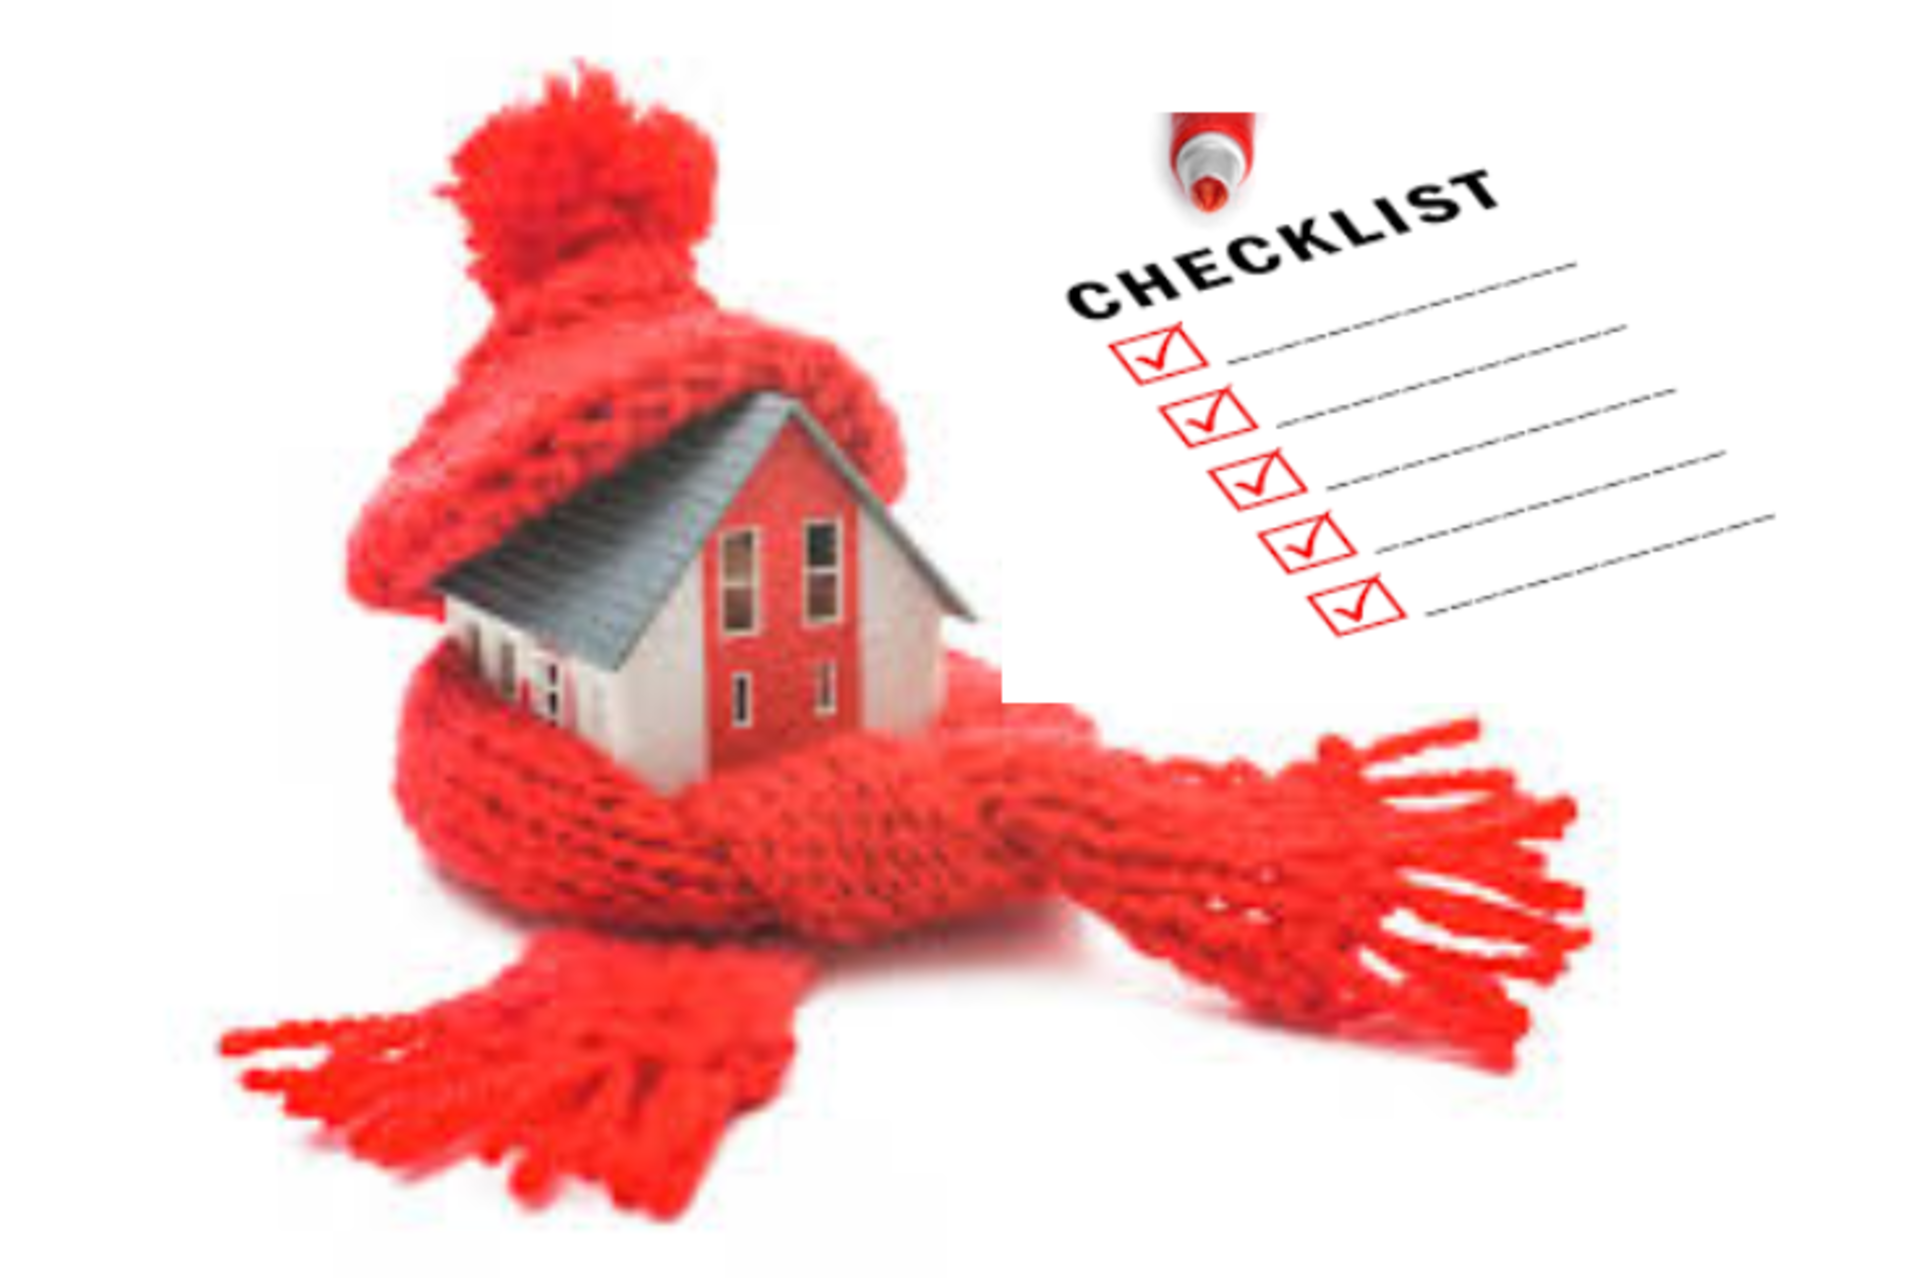 Fall Checklist for WINTERIZING Your Home